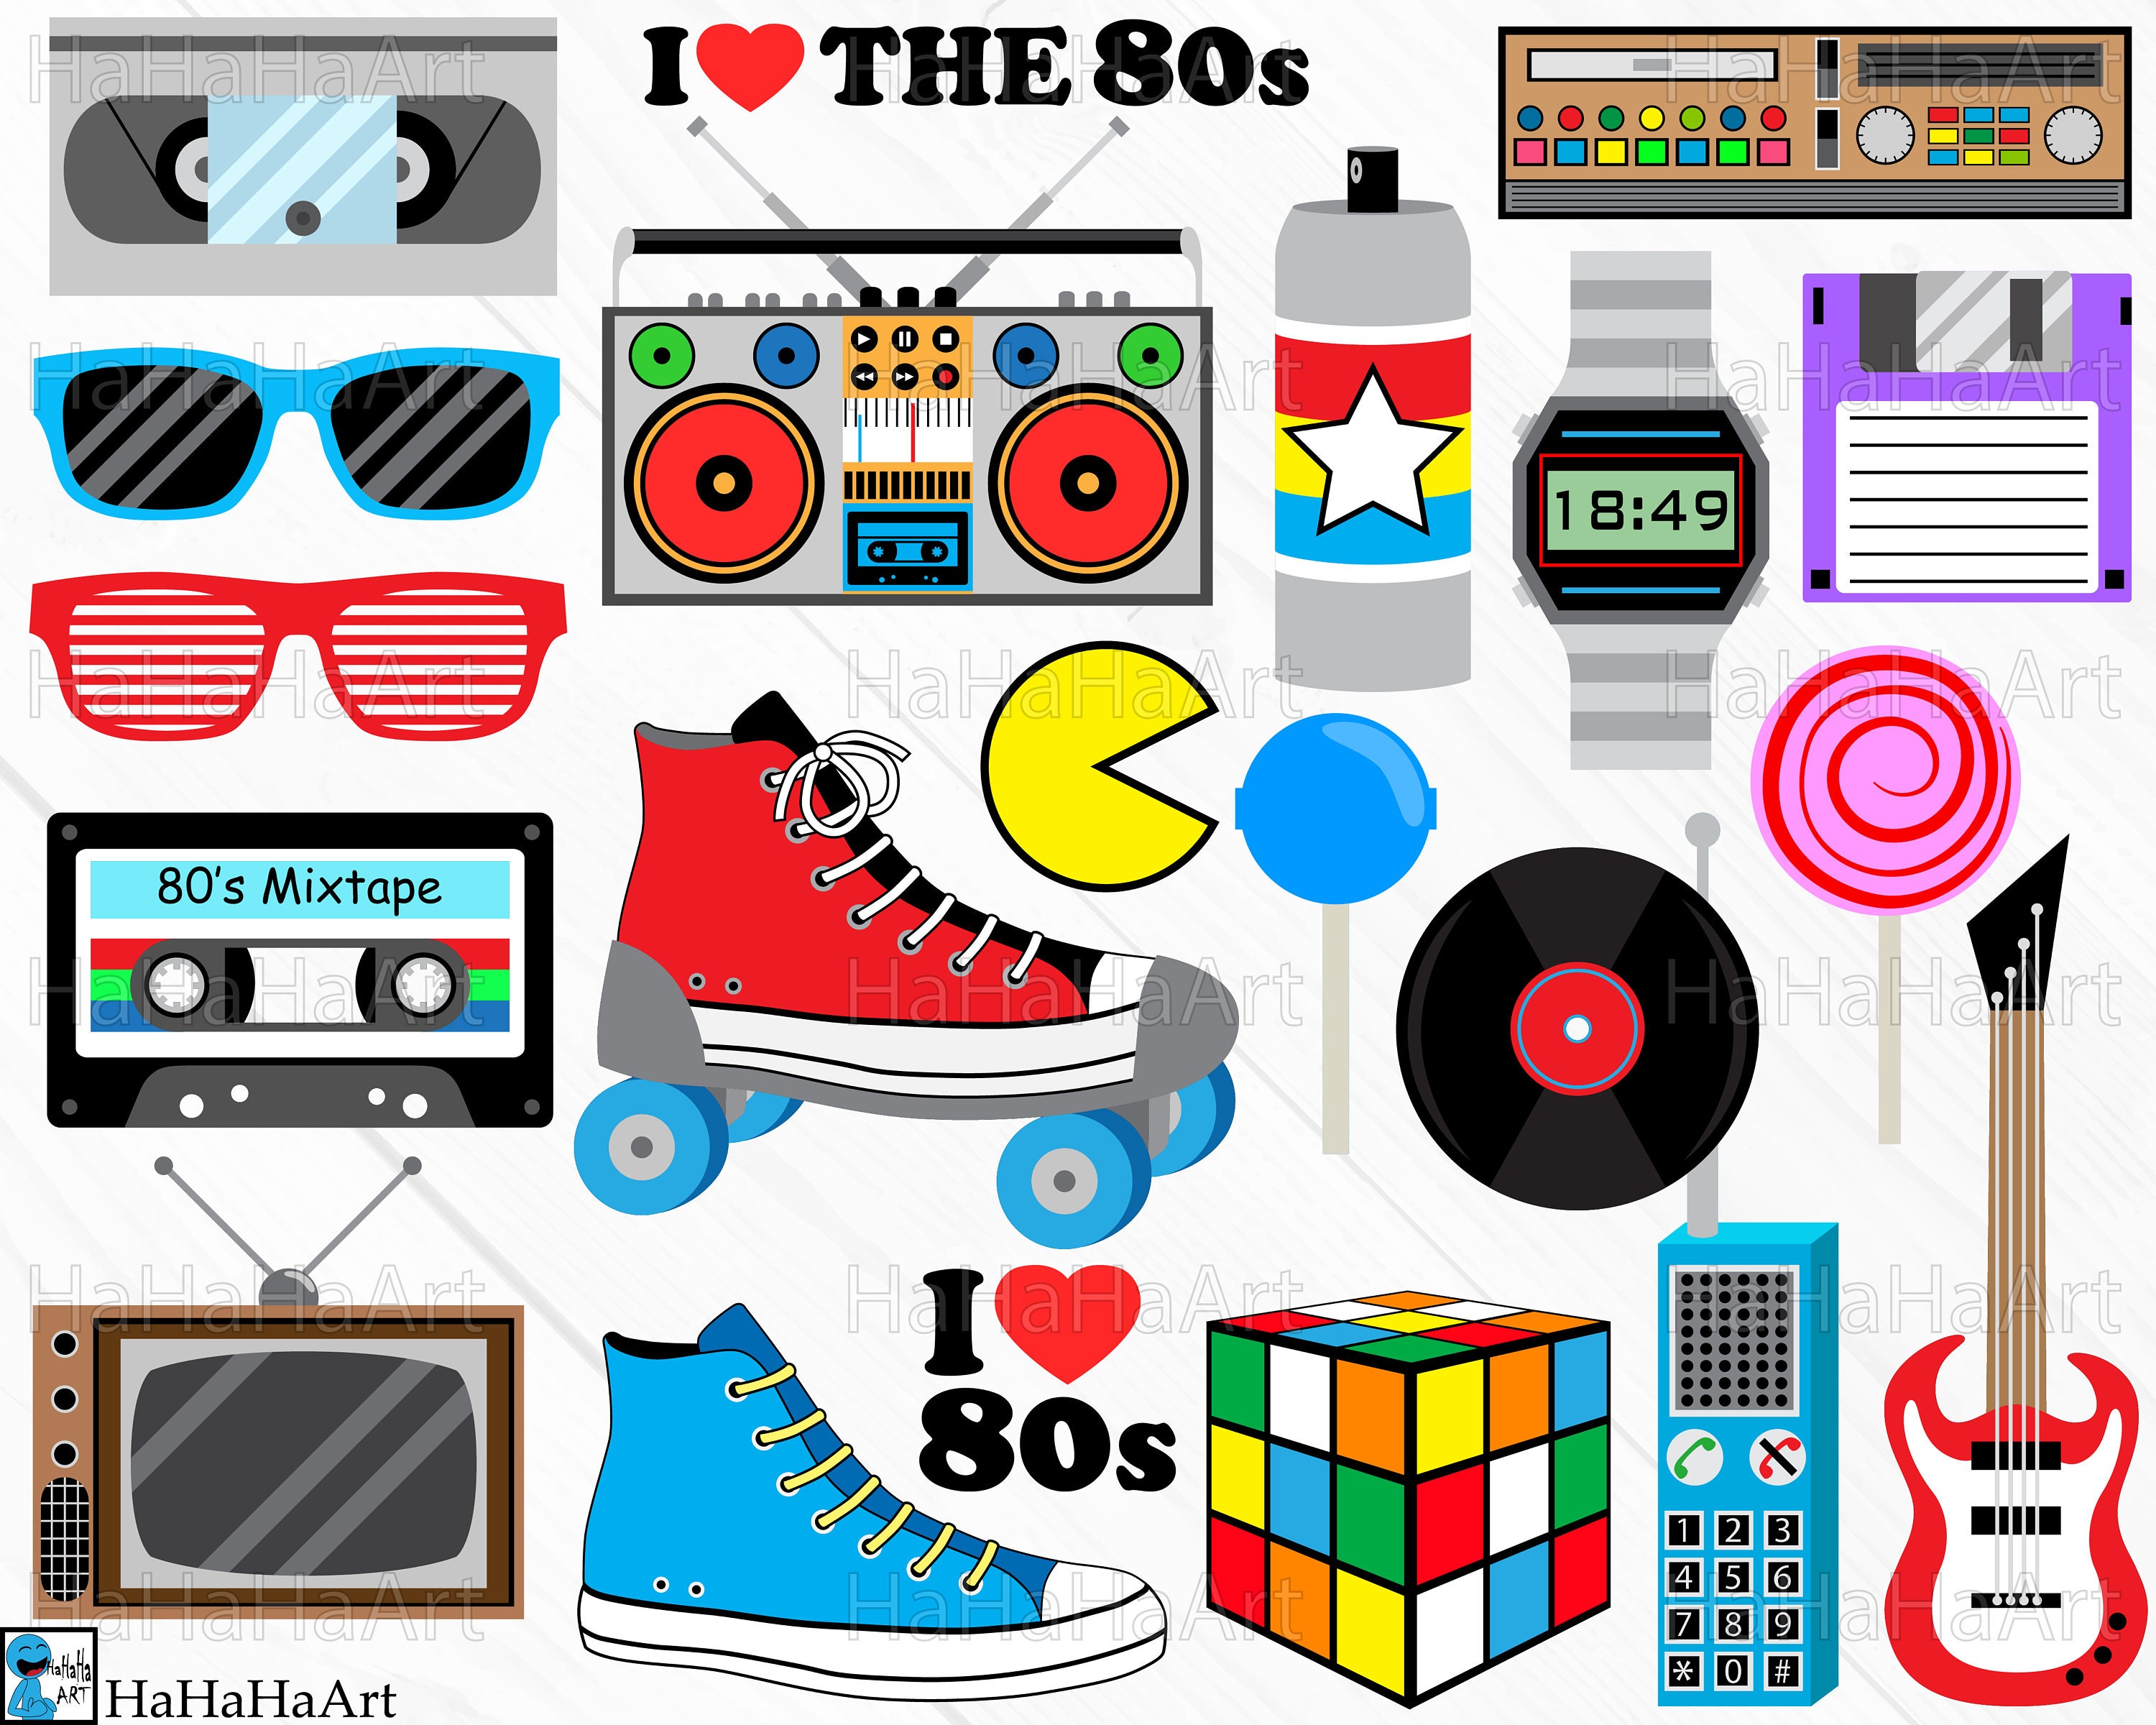 I Love the 80s Clipart / Cutting Files Svg Png Jpg Dxf Eps - Etsy UK